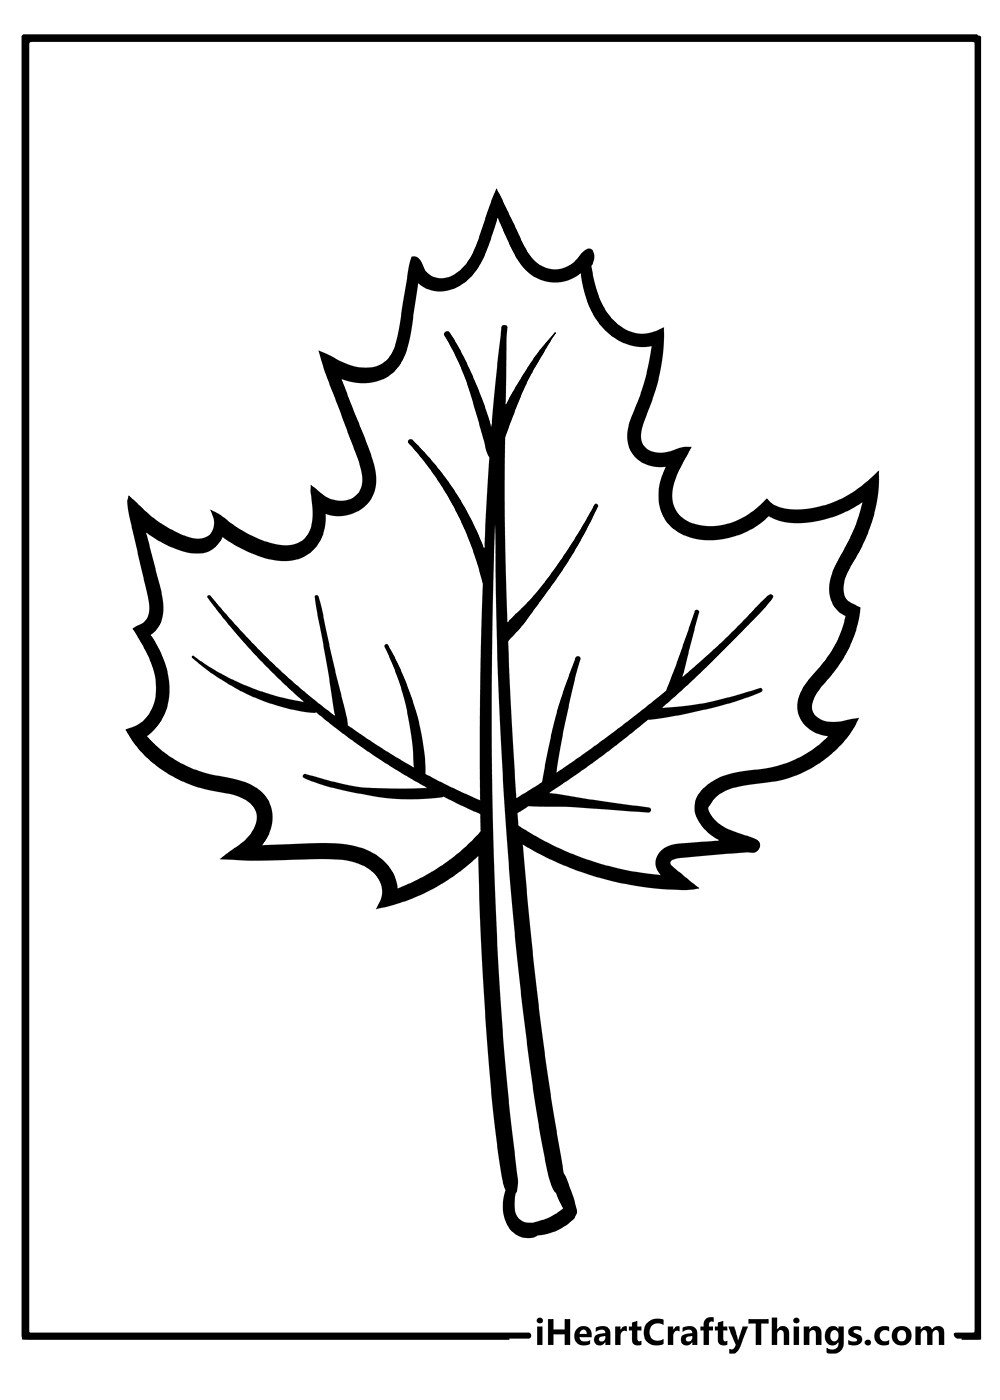 Fall Leaves Coloring Pages for kids free download